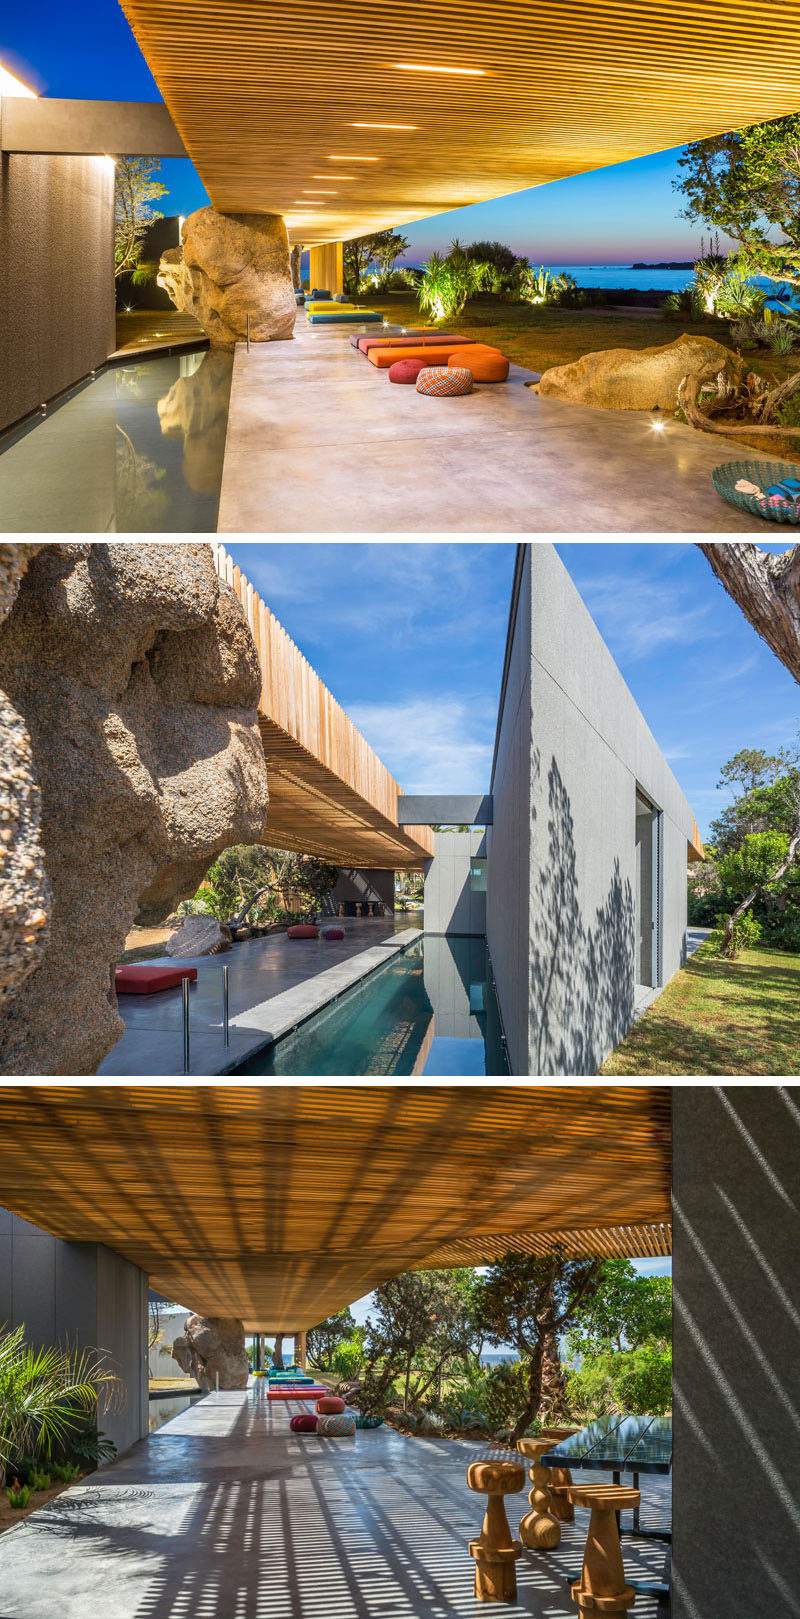 This modern villa has pergola with a long pool that runs alongside it, and a large rock formation has been left in place, and everything has been built around it.